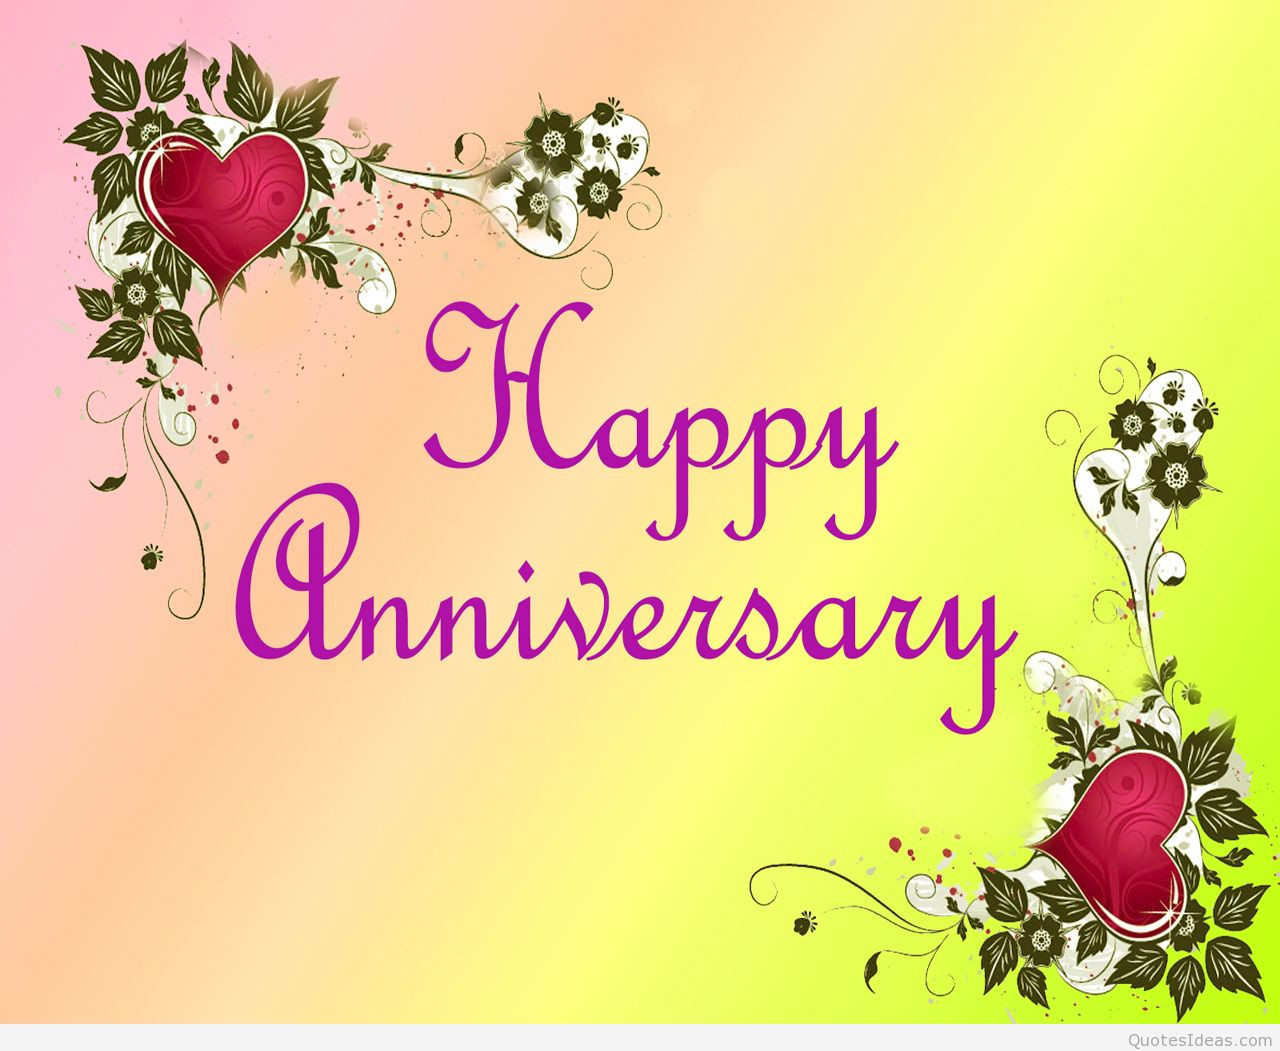 Happy Anniversary Quotes For Friend
 Happy anniversary wishes quotes messages on wallpapers